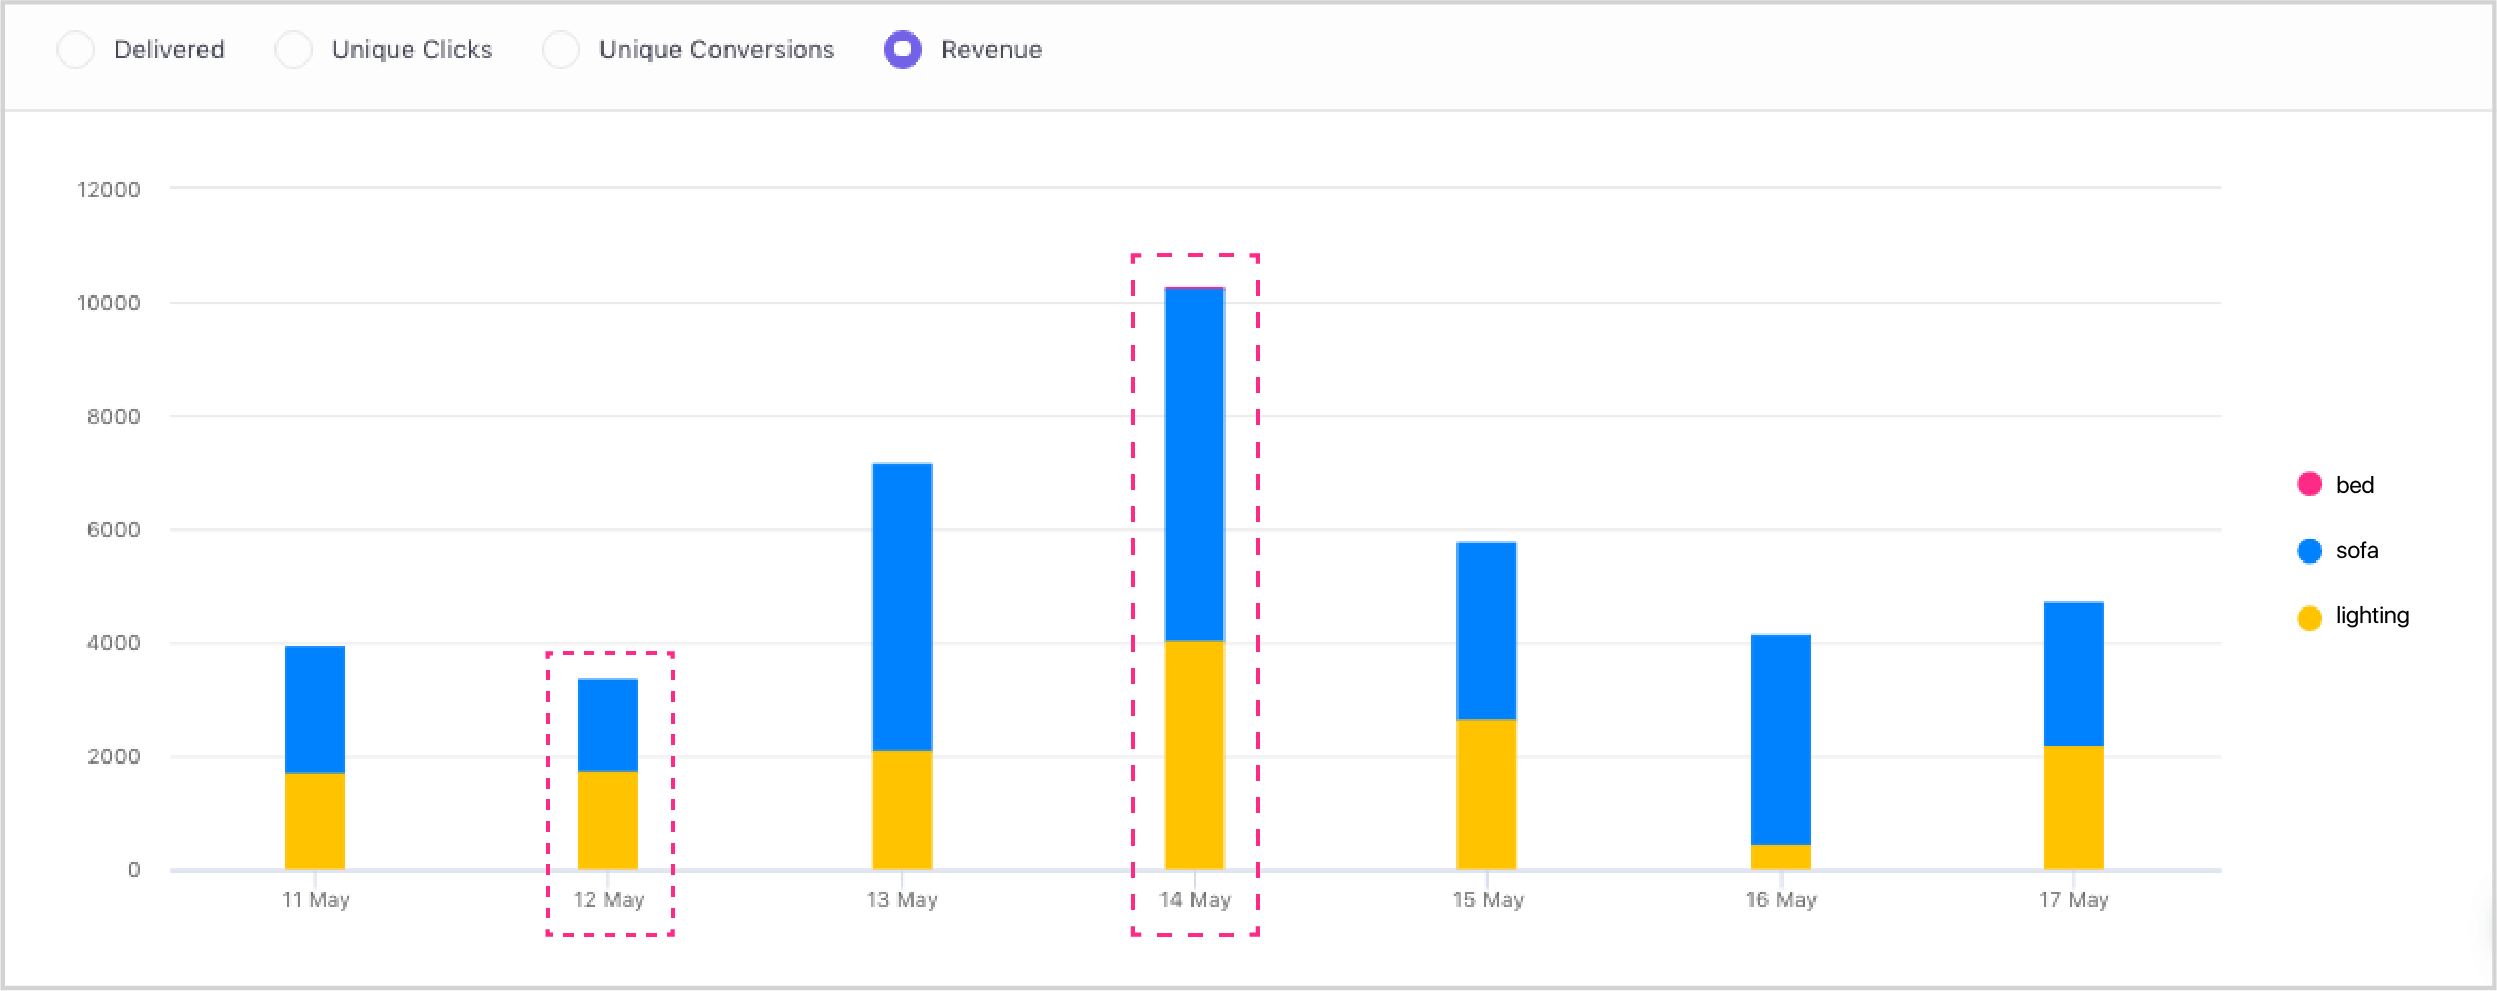 Use Tags to compare performance of your business verticals and categories